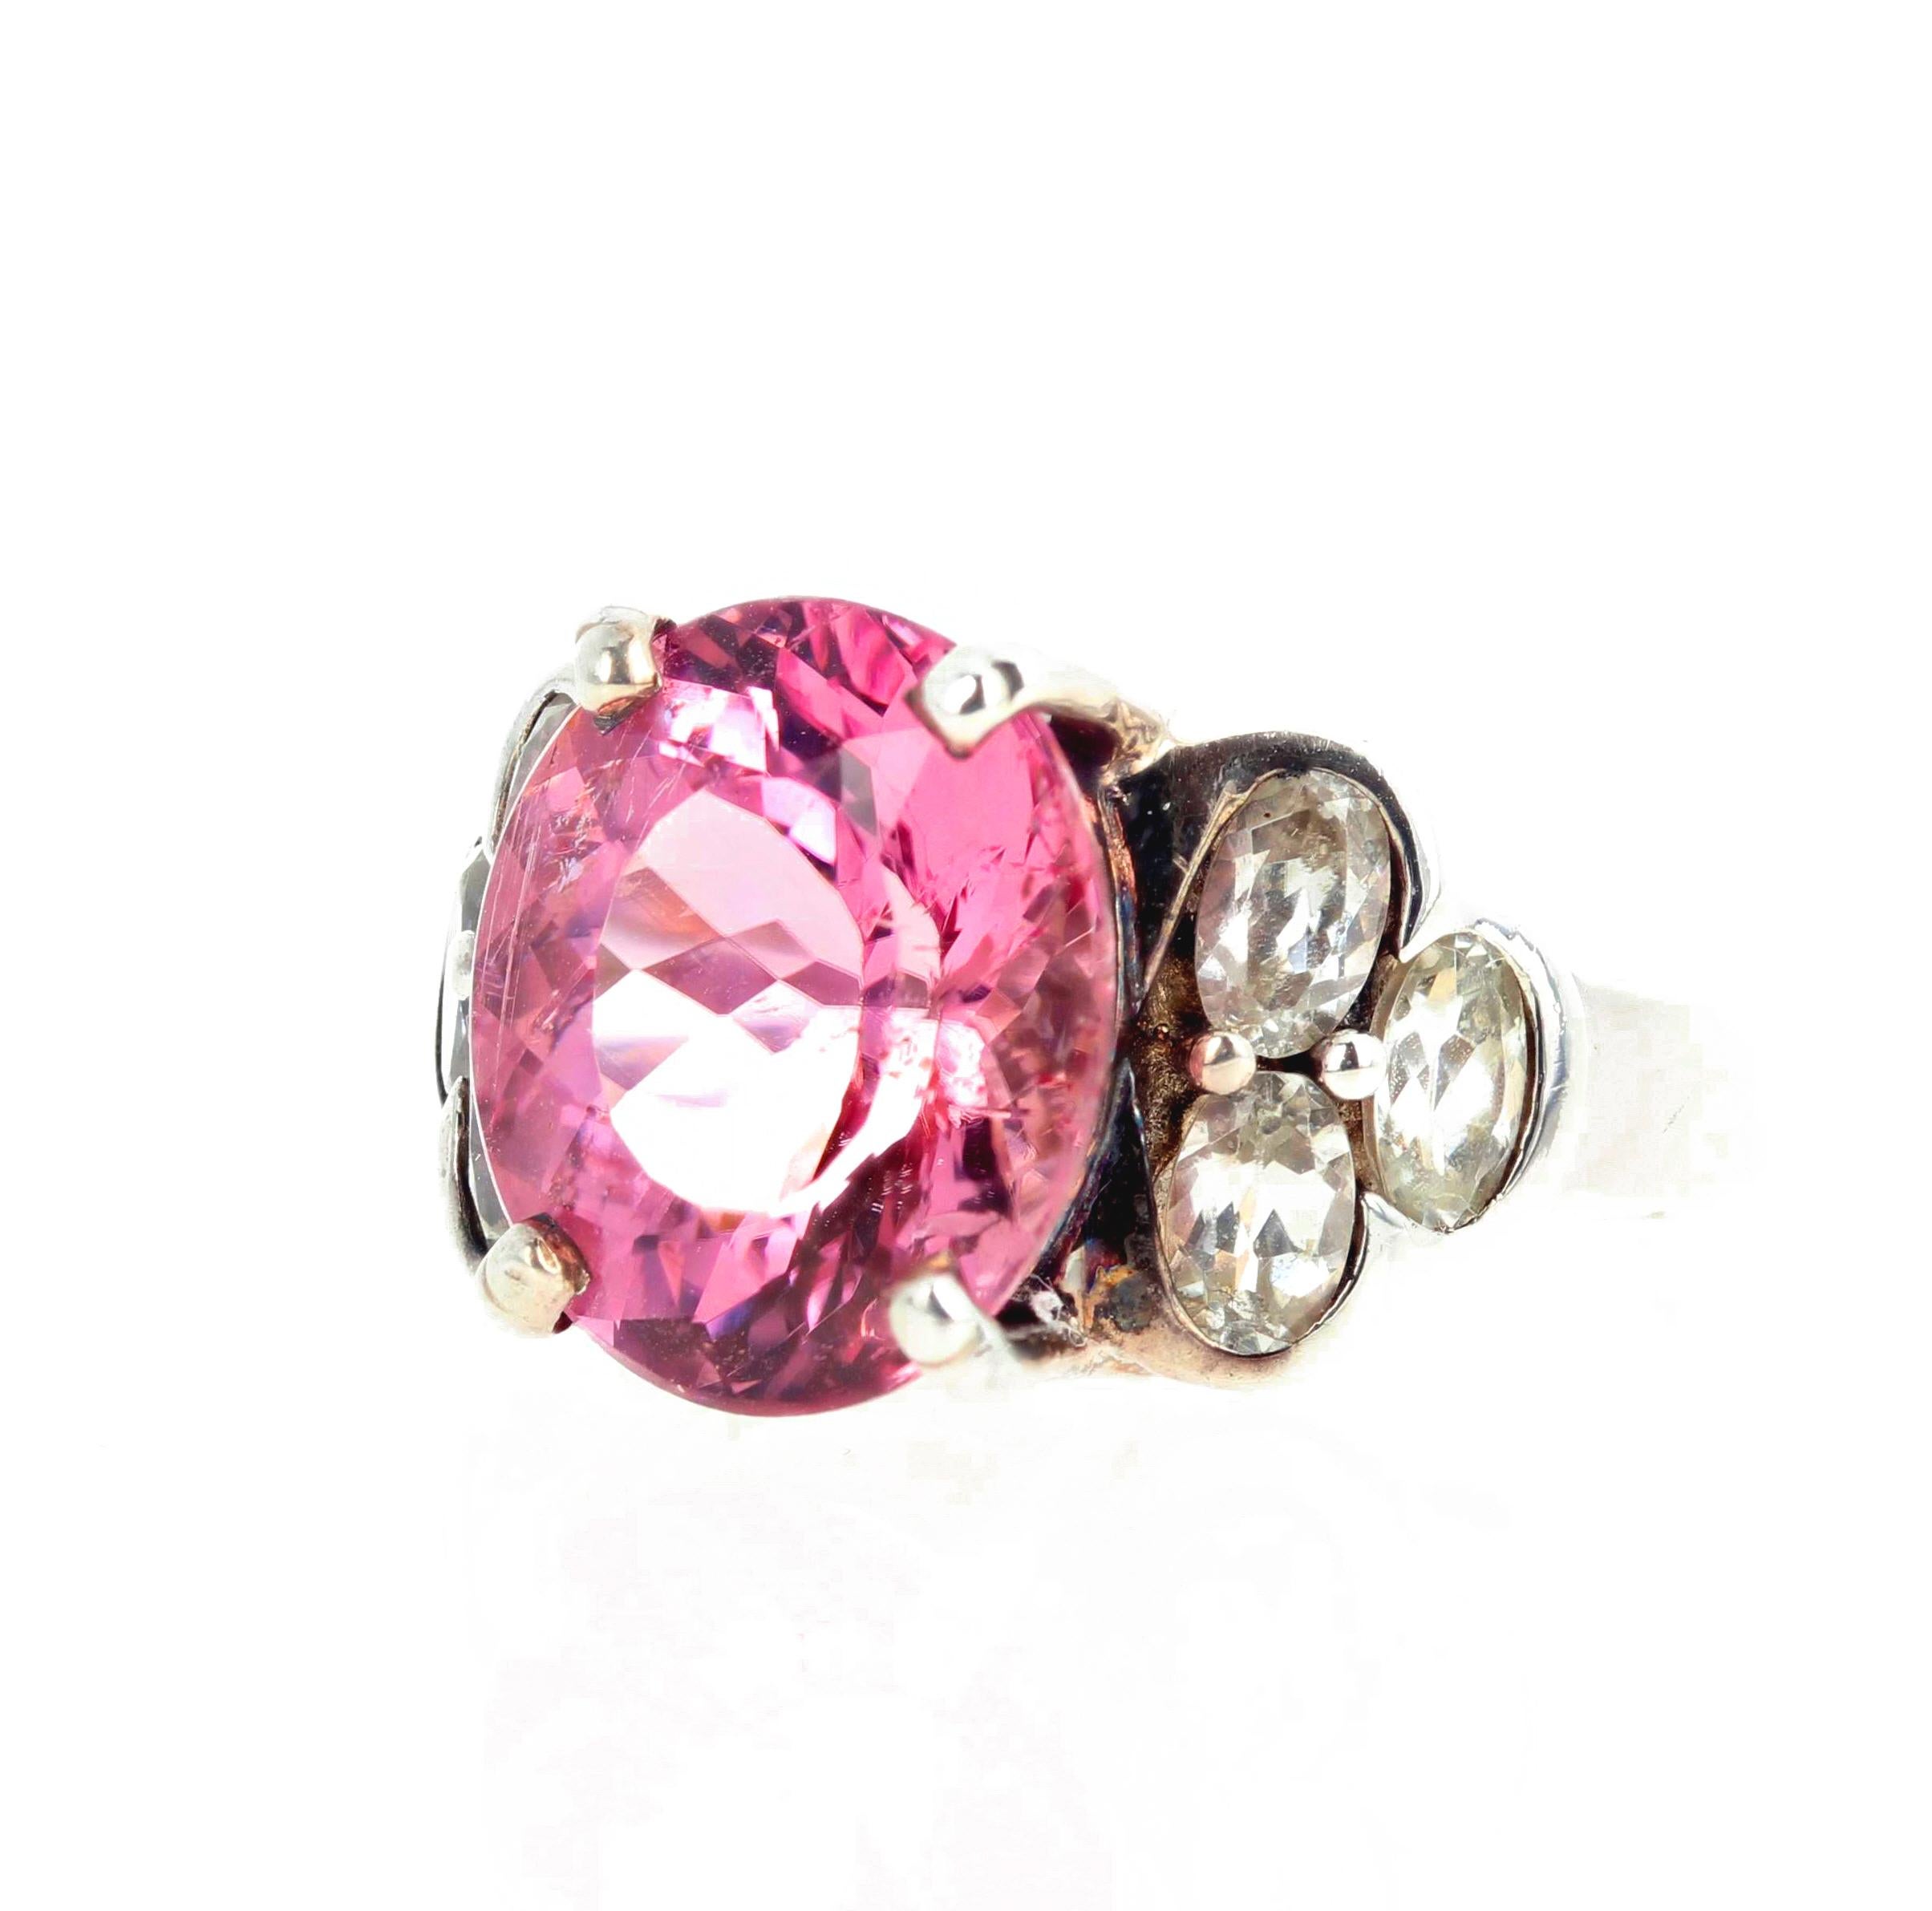 AJD Beautiful 4 Cts Sparkling Pink Tourmaline & Silver Quartz Silver Ring For Sale 1